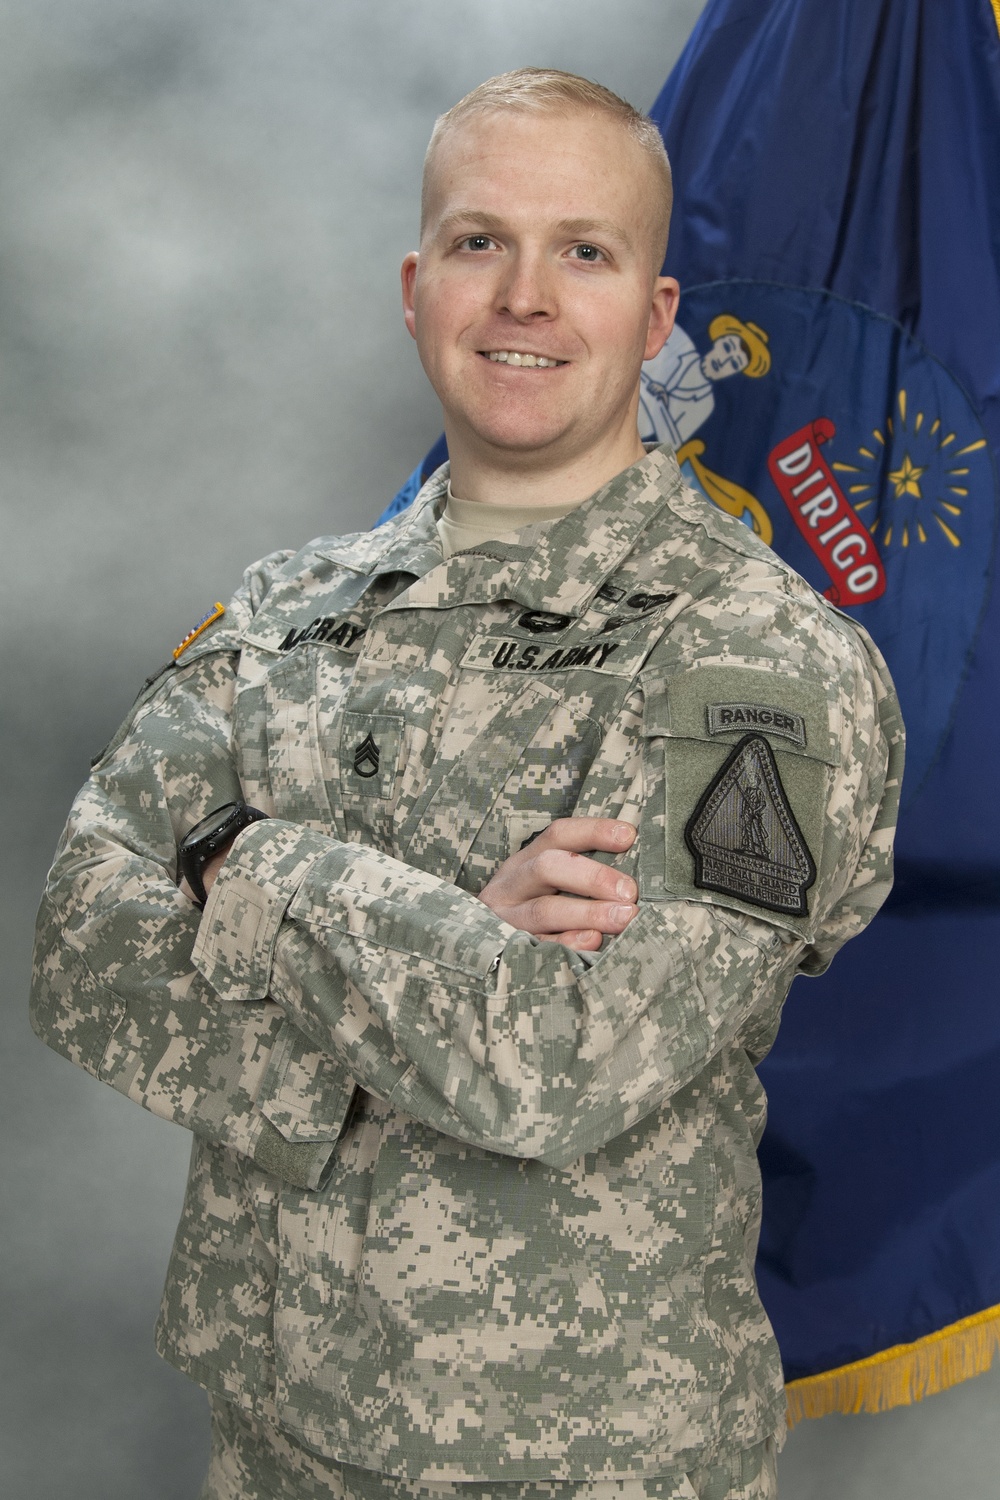 Maine Ranger earns top honors in national recruiting competition